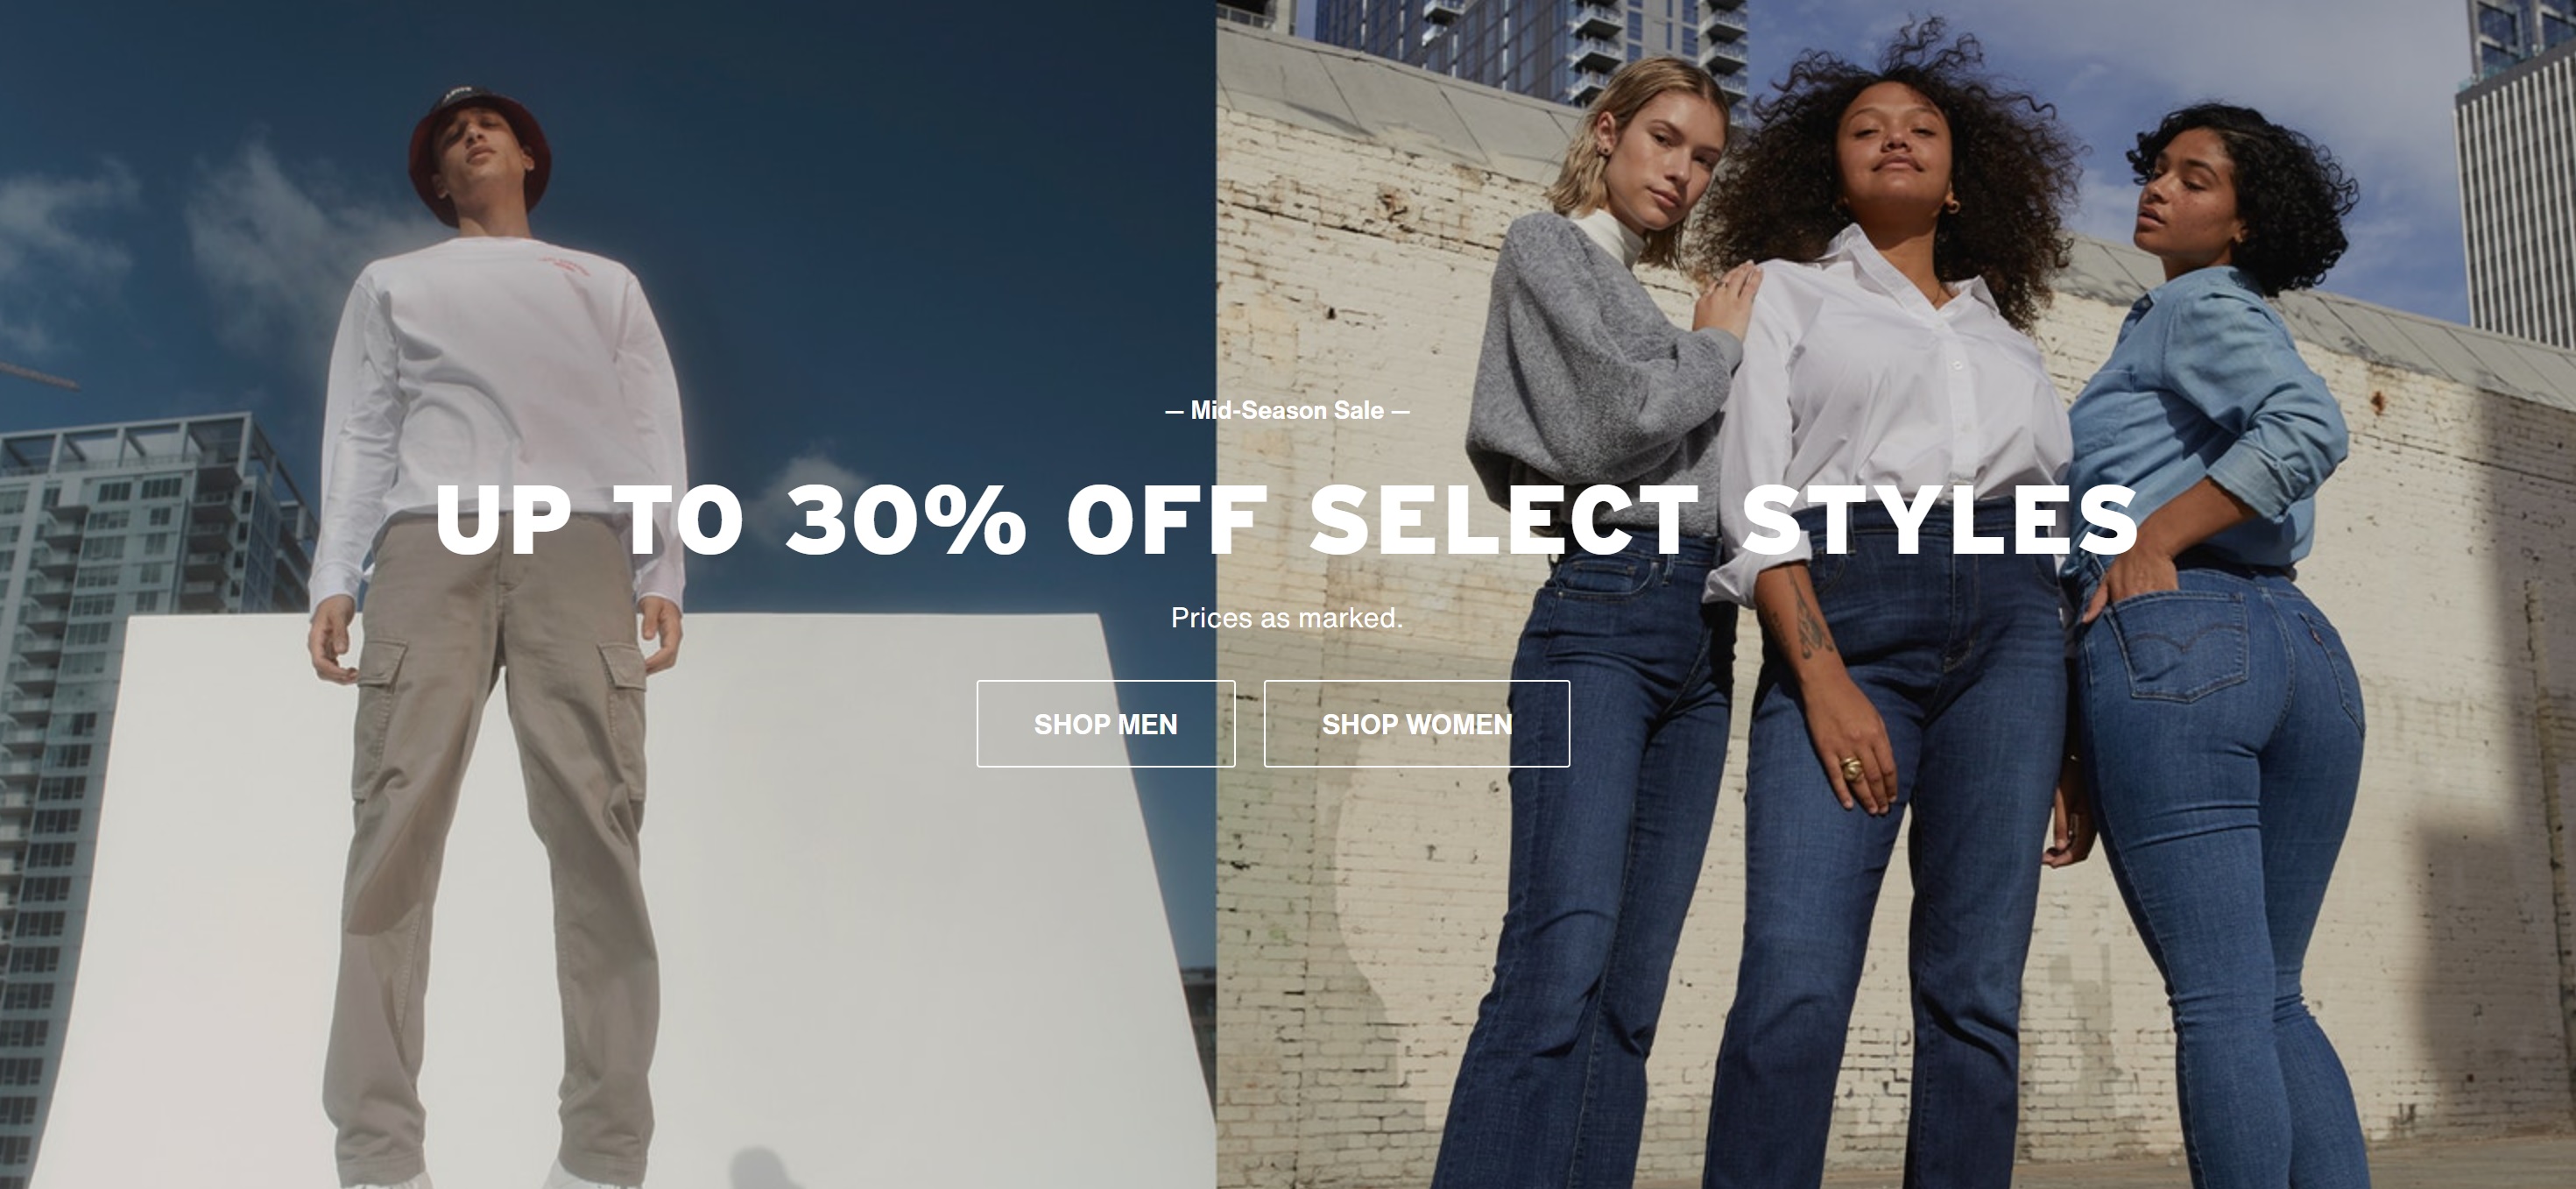 Levi's Canada Mid Season Sale: Save Up to 30% OFF Many Styles Including ...